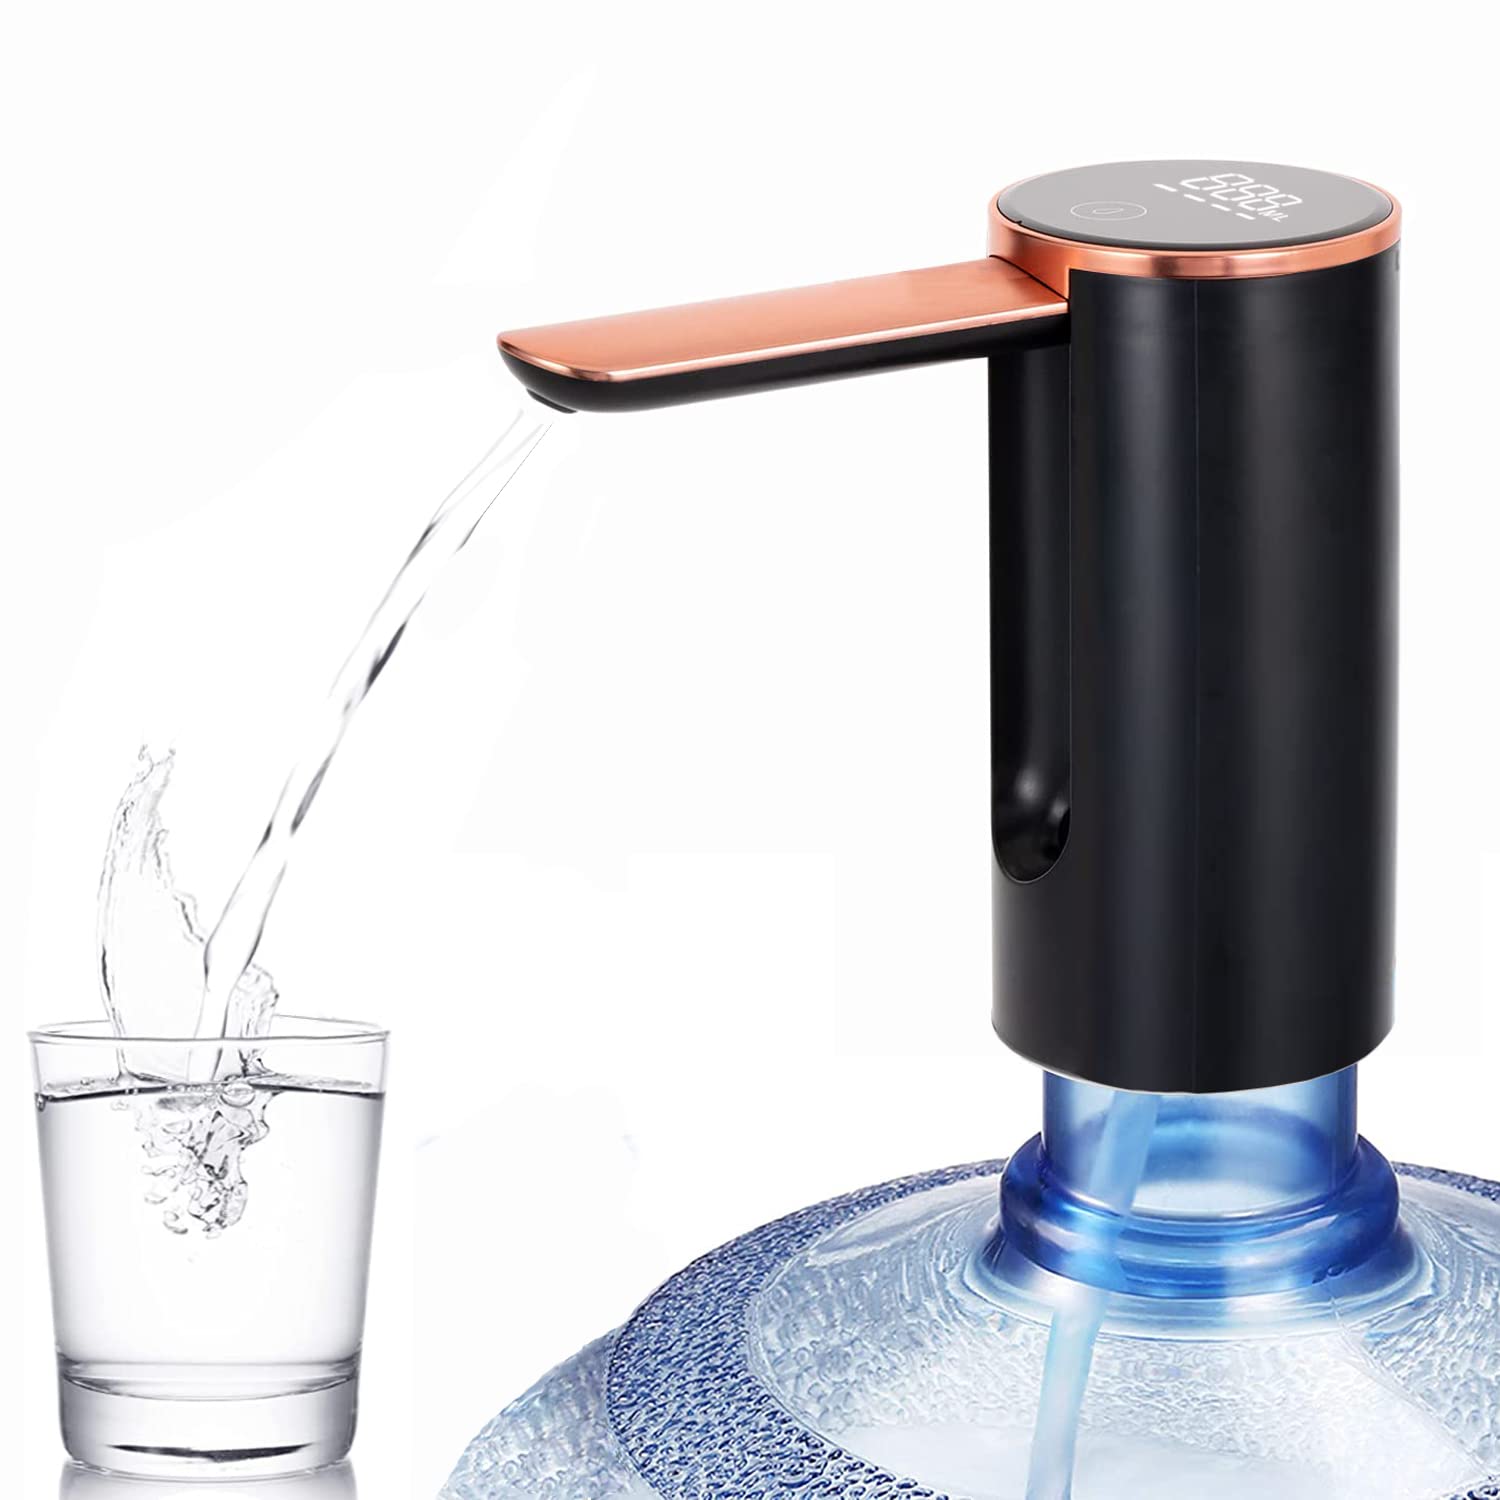 Hoteon Folding Water Dispenser Pump, LCD Display with Touch Control, Rechargeable Water Dispenser Pu